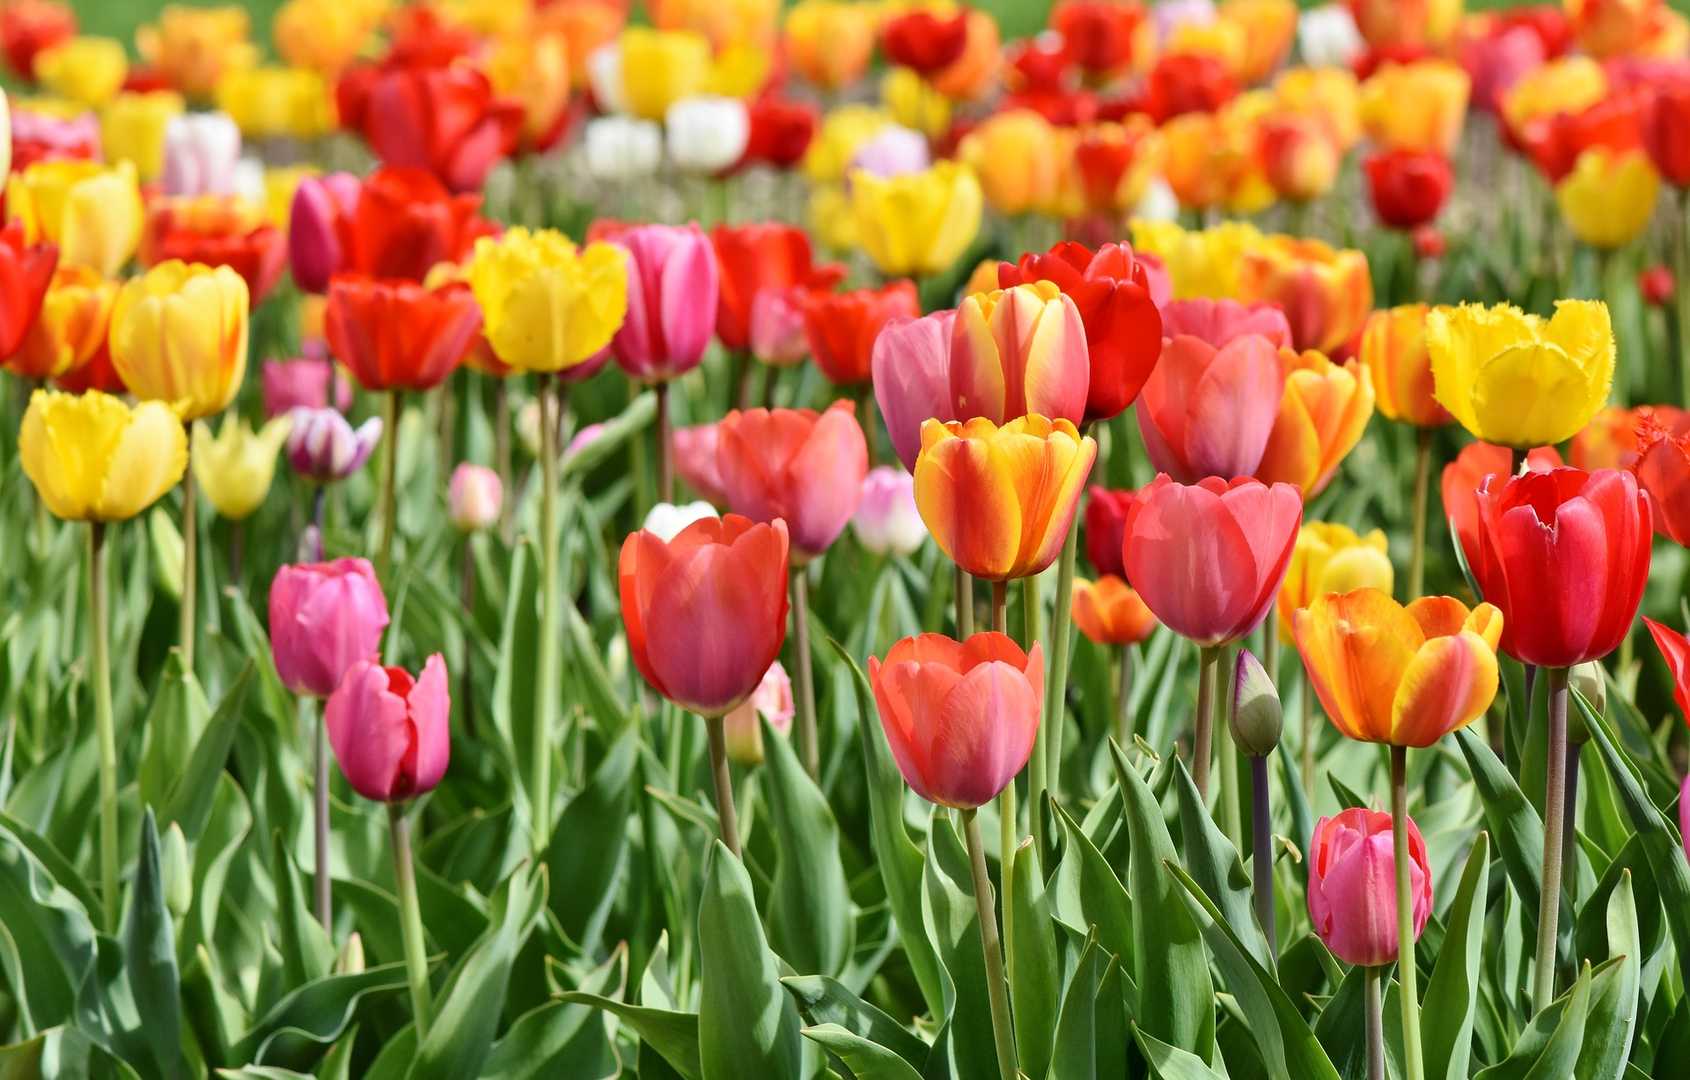 Many brightly colored tulips in green grass